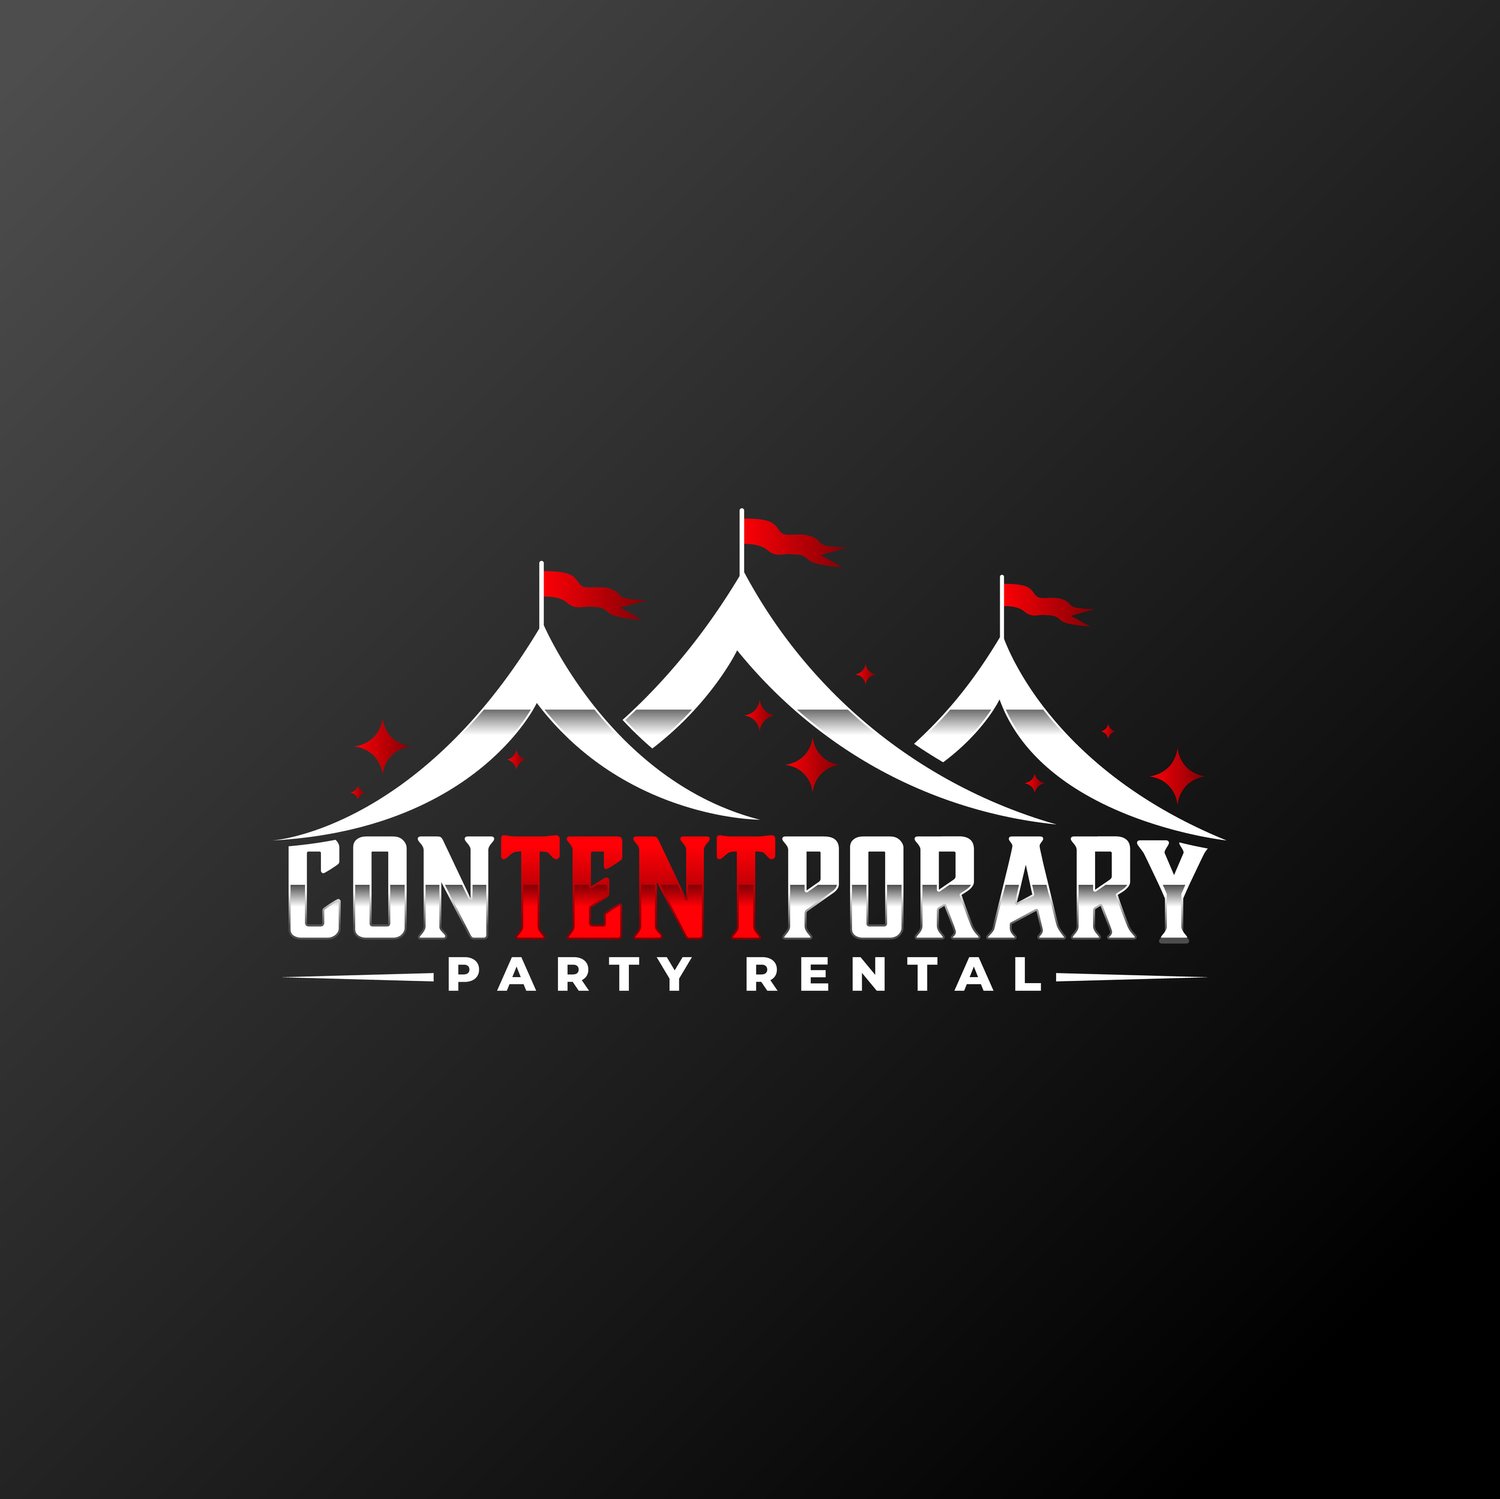 Contentporary Party Rental